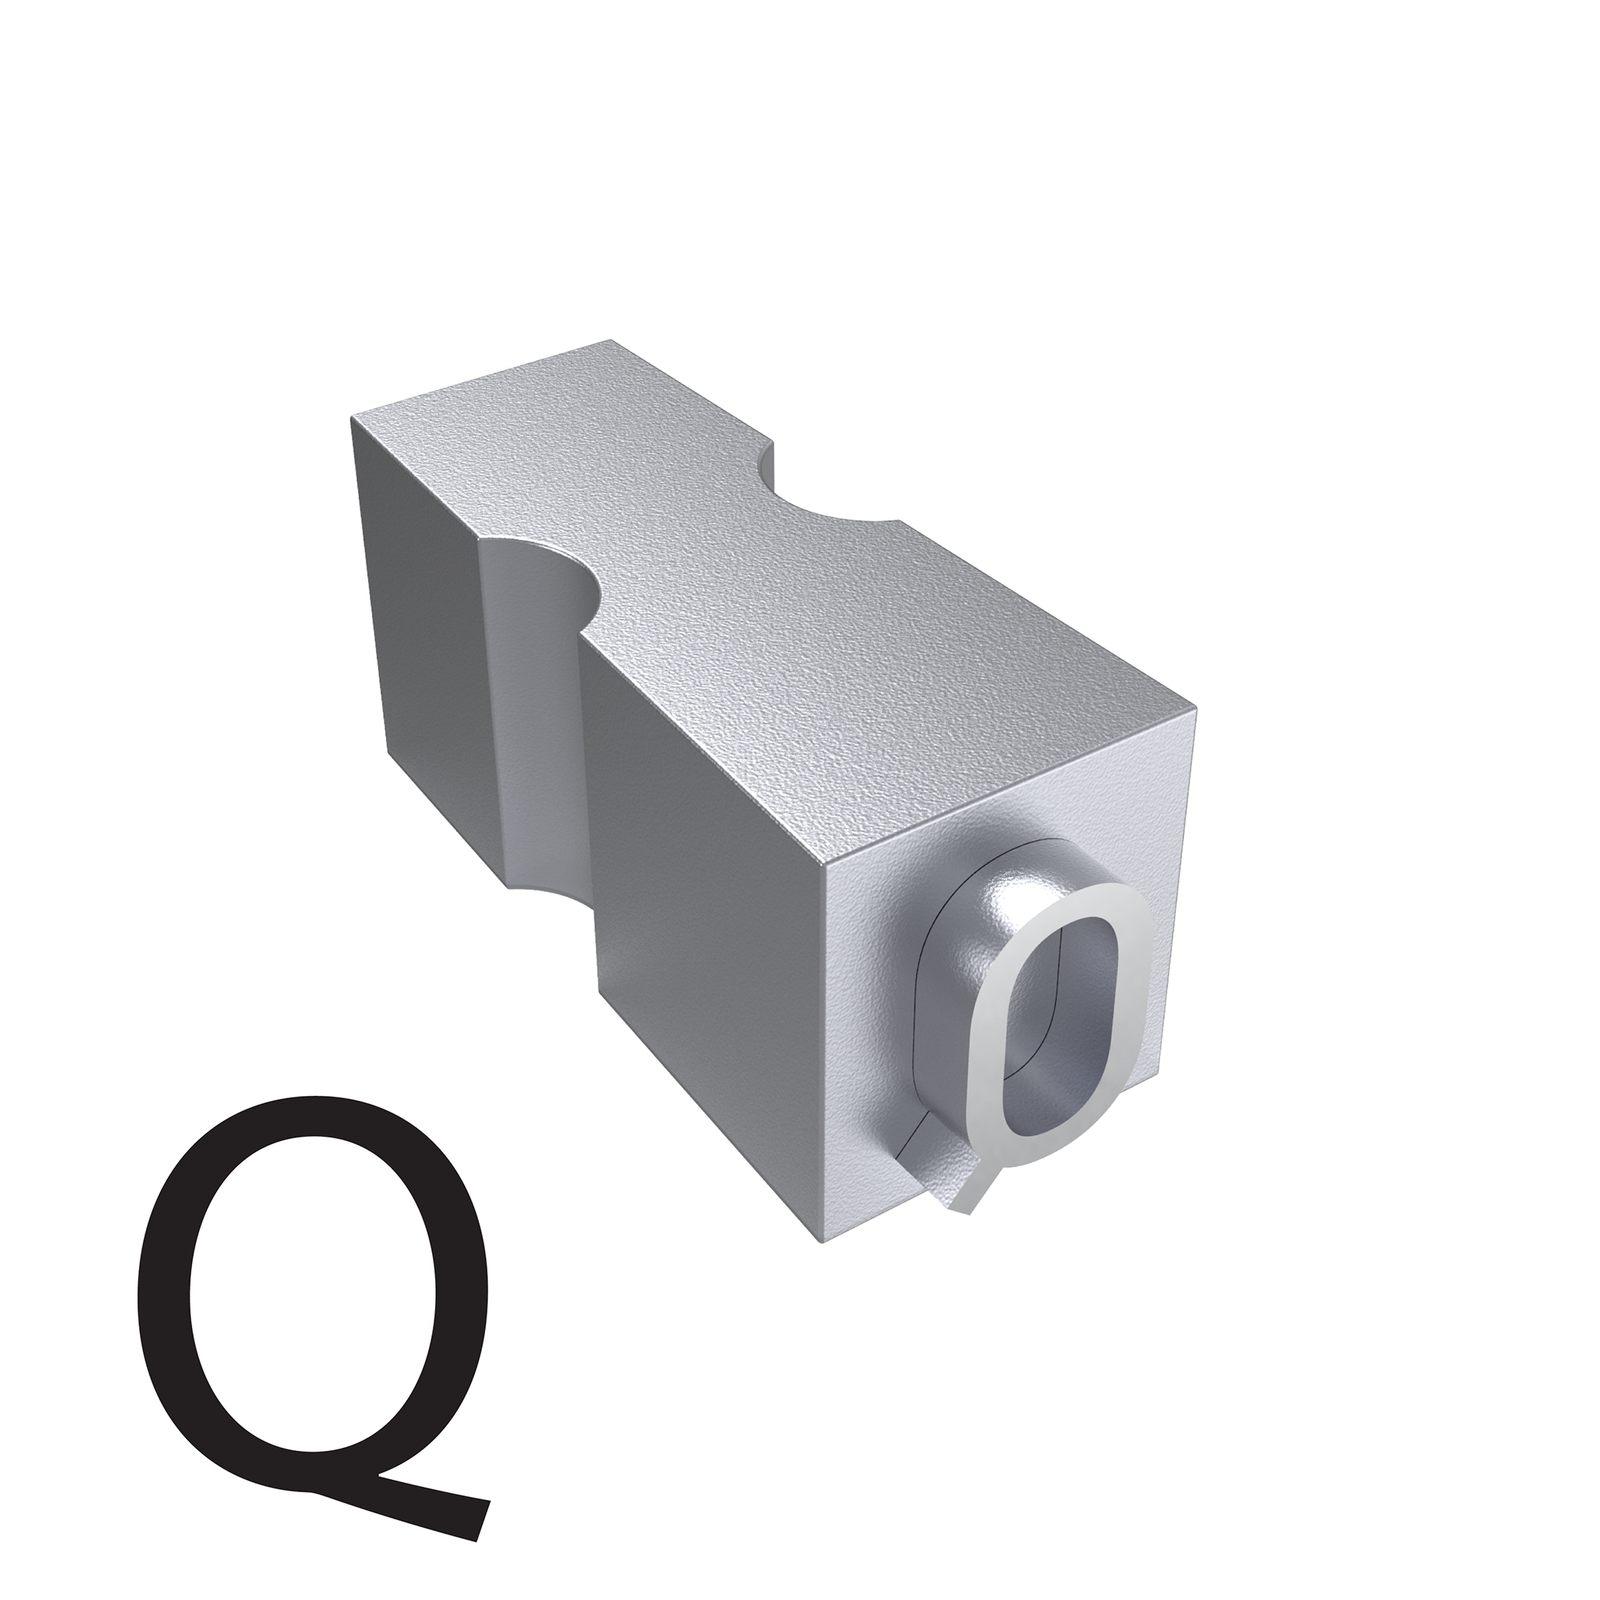 Type of letter Q for hot ink roll printers